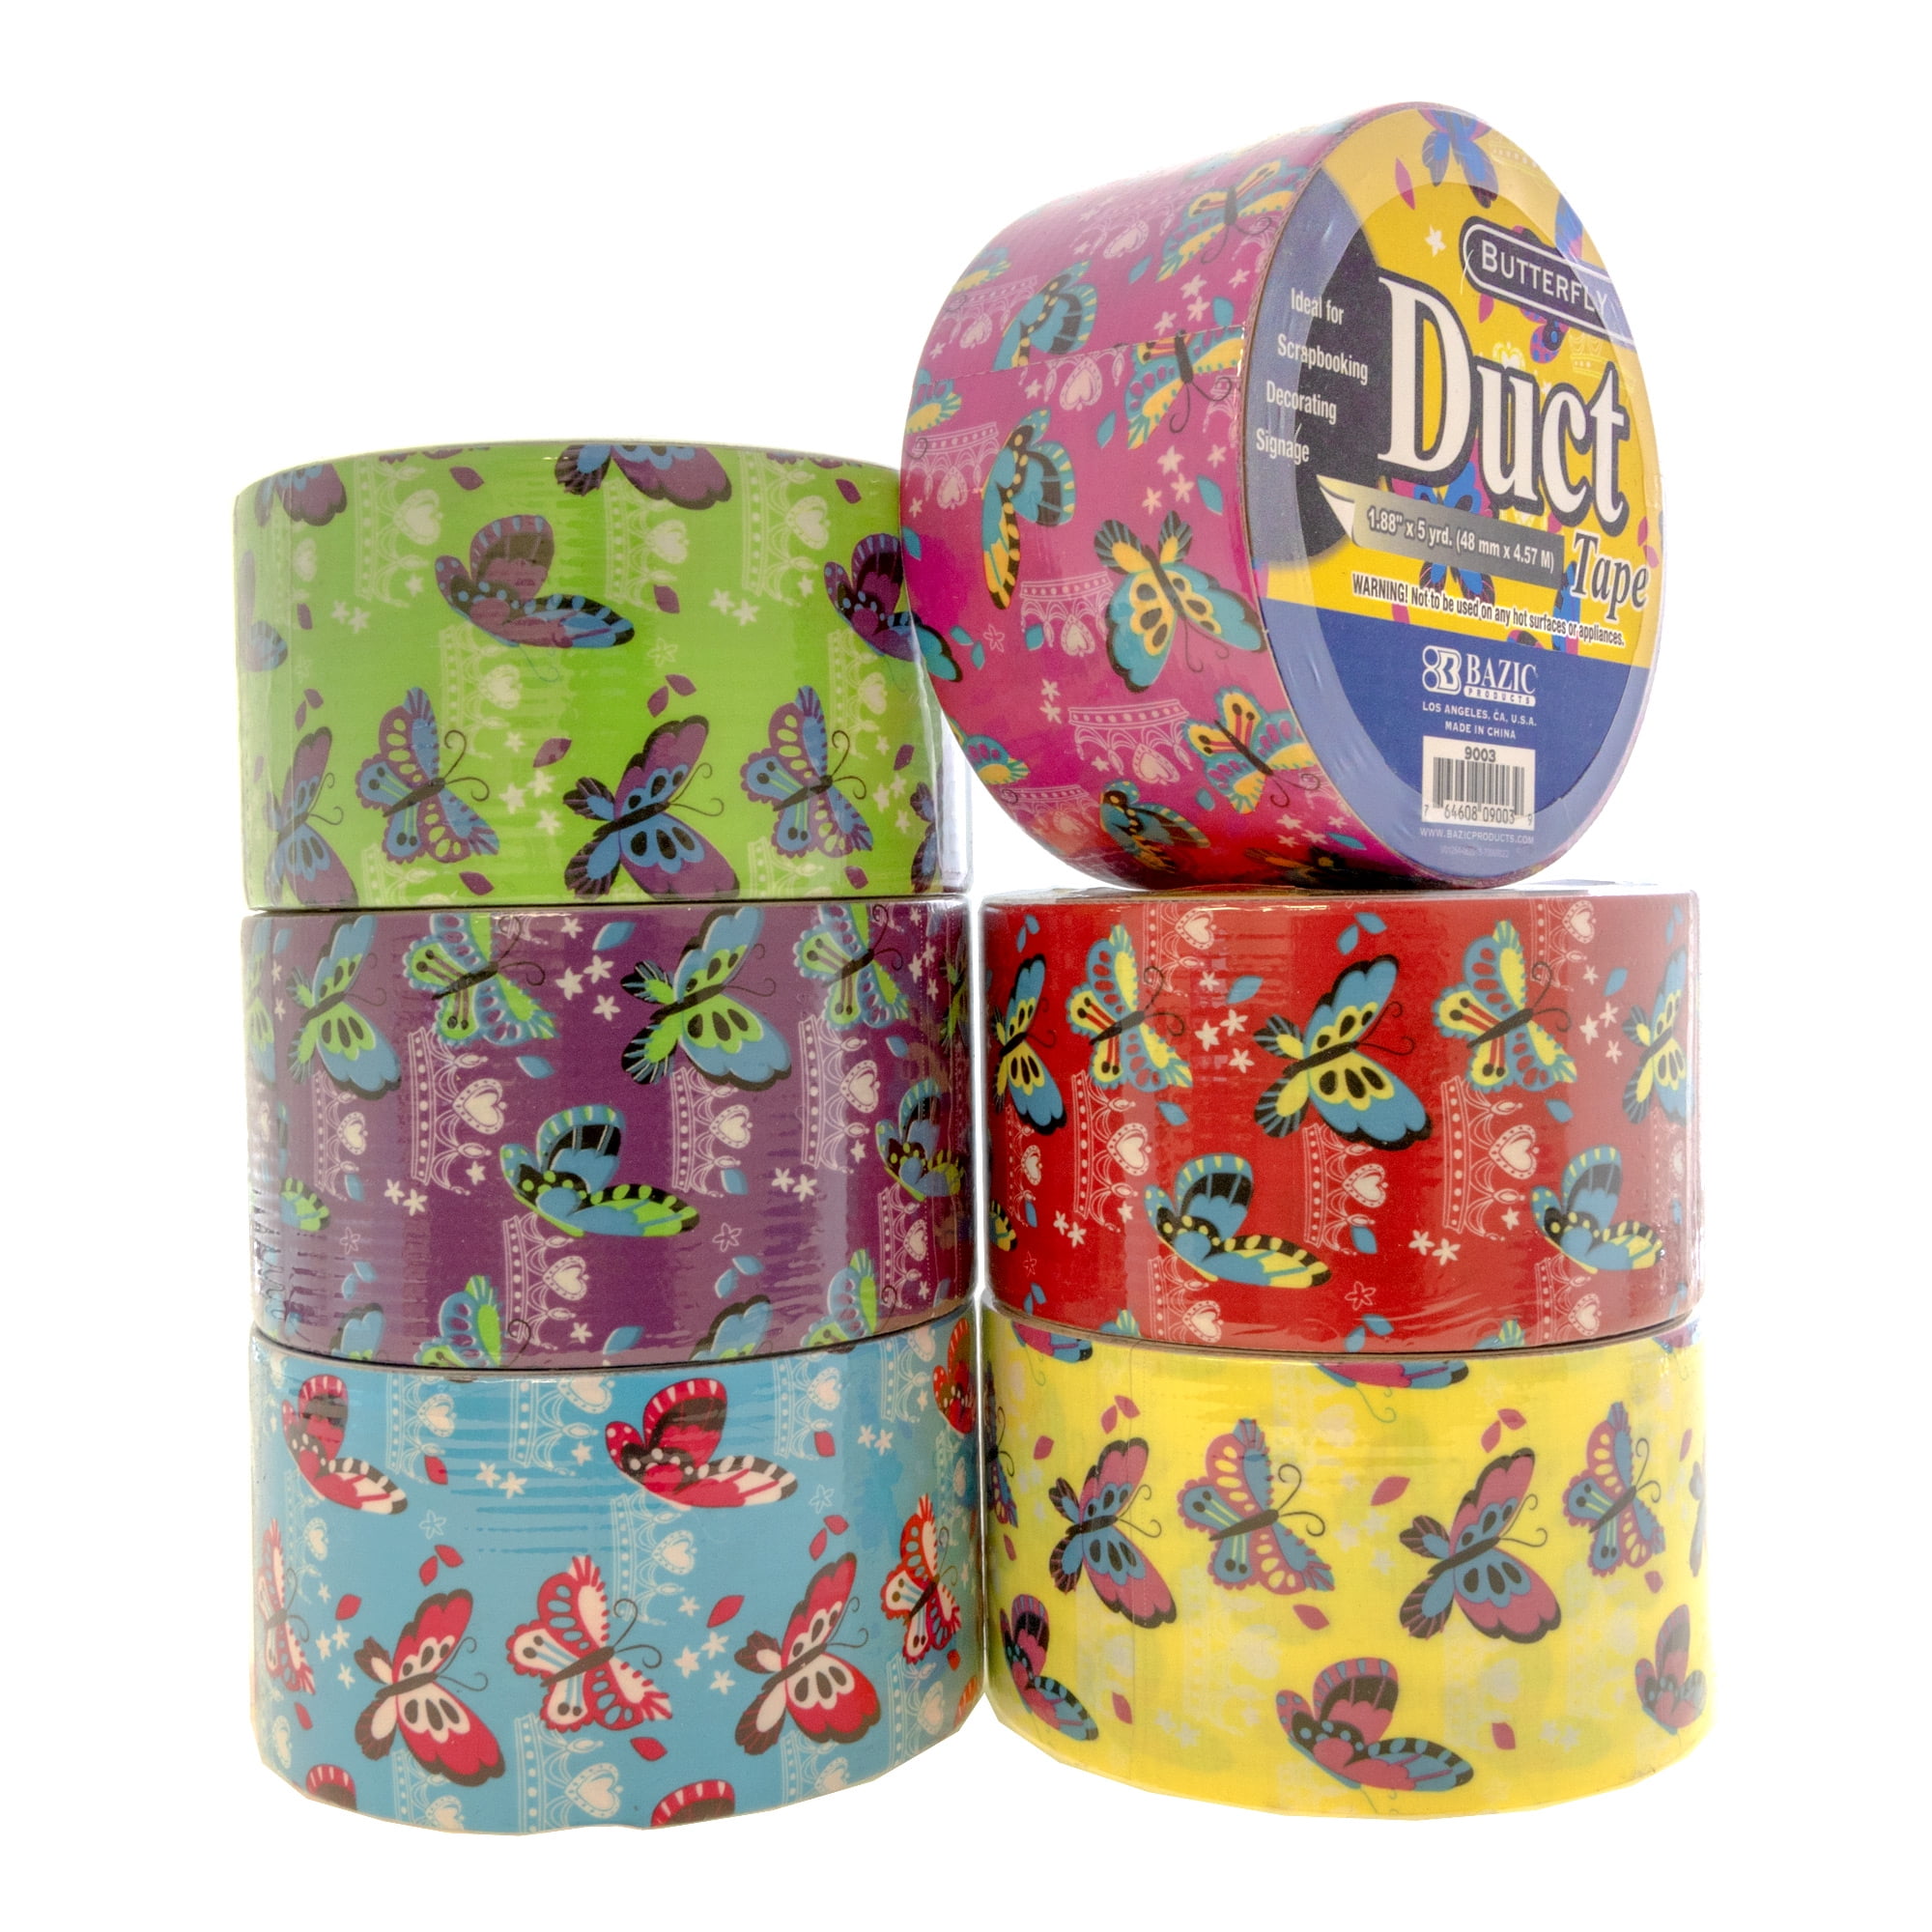 BAZIC Printed Duct Tape Star Pattern 1.88 X 5 Yards, 24-Pack